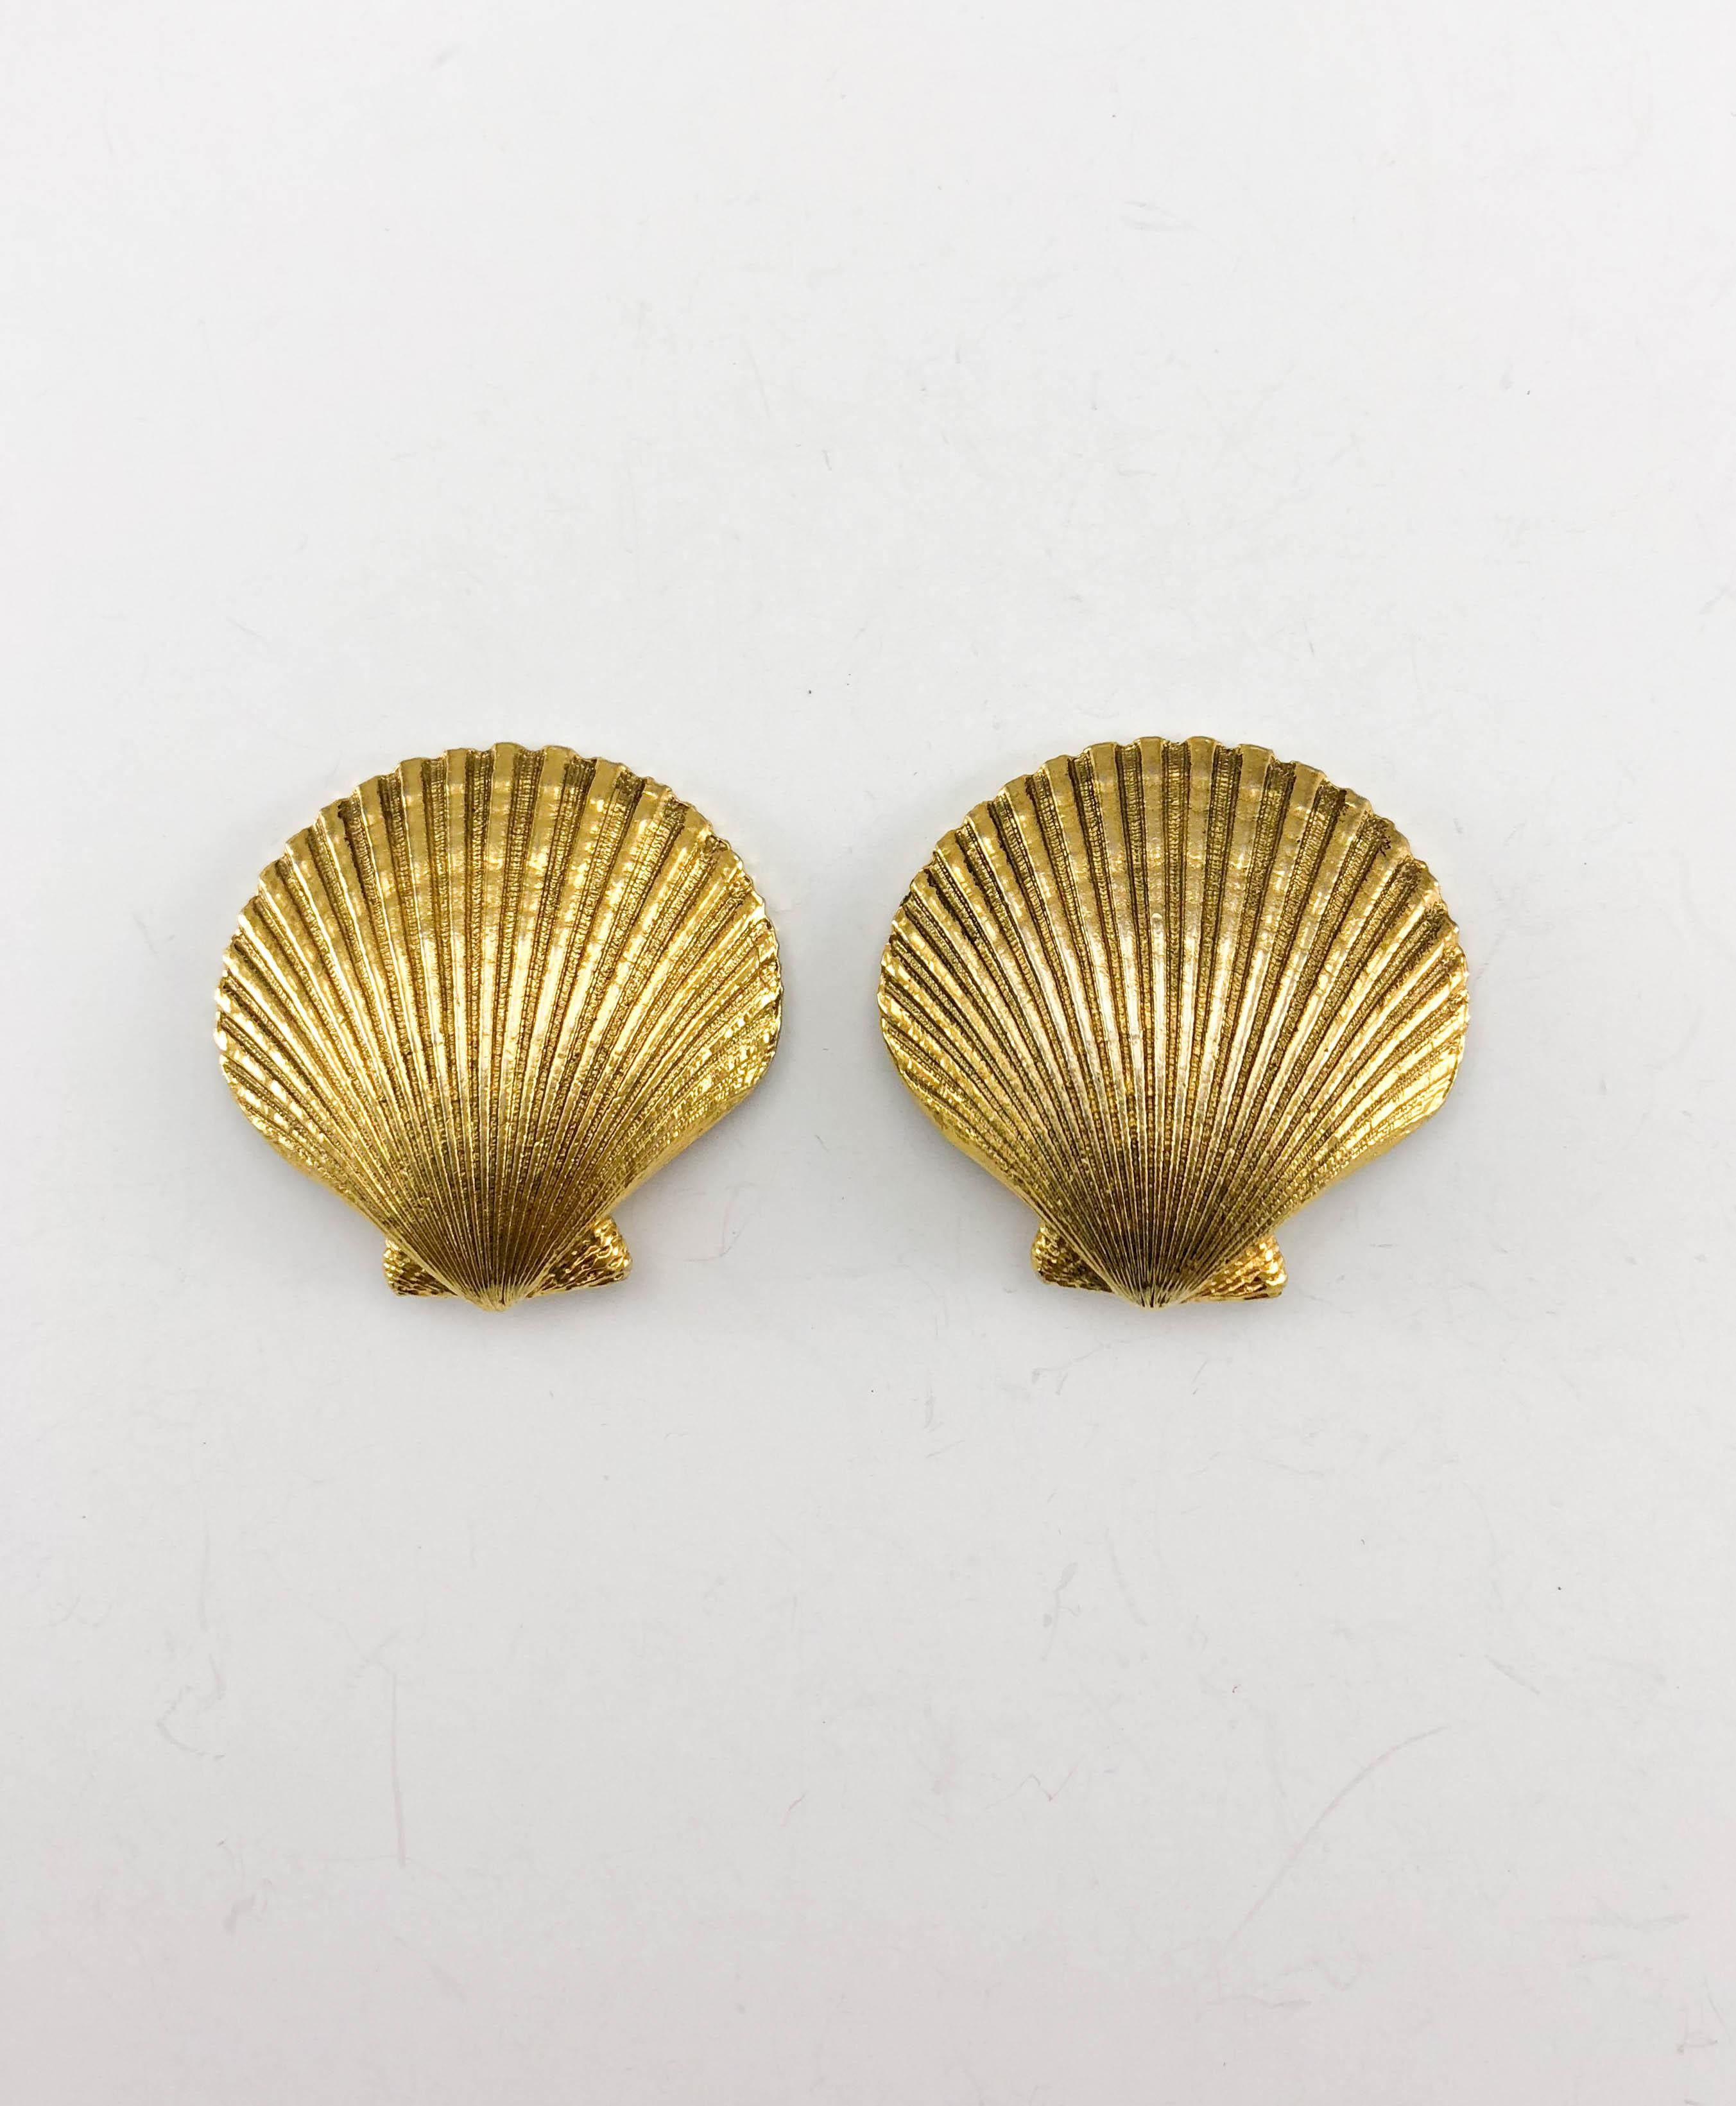 Vintage Yves Saint Laurent Gilt Seashell Clip-On Earrings. These stylish earrings by Yves Saint Laurent date back from the 1990’s. Shaped as seashells, they are made in gilt metal. The size is perfect to add impact to look, but not overpower it.